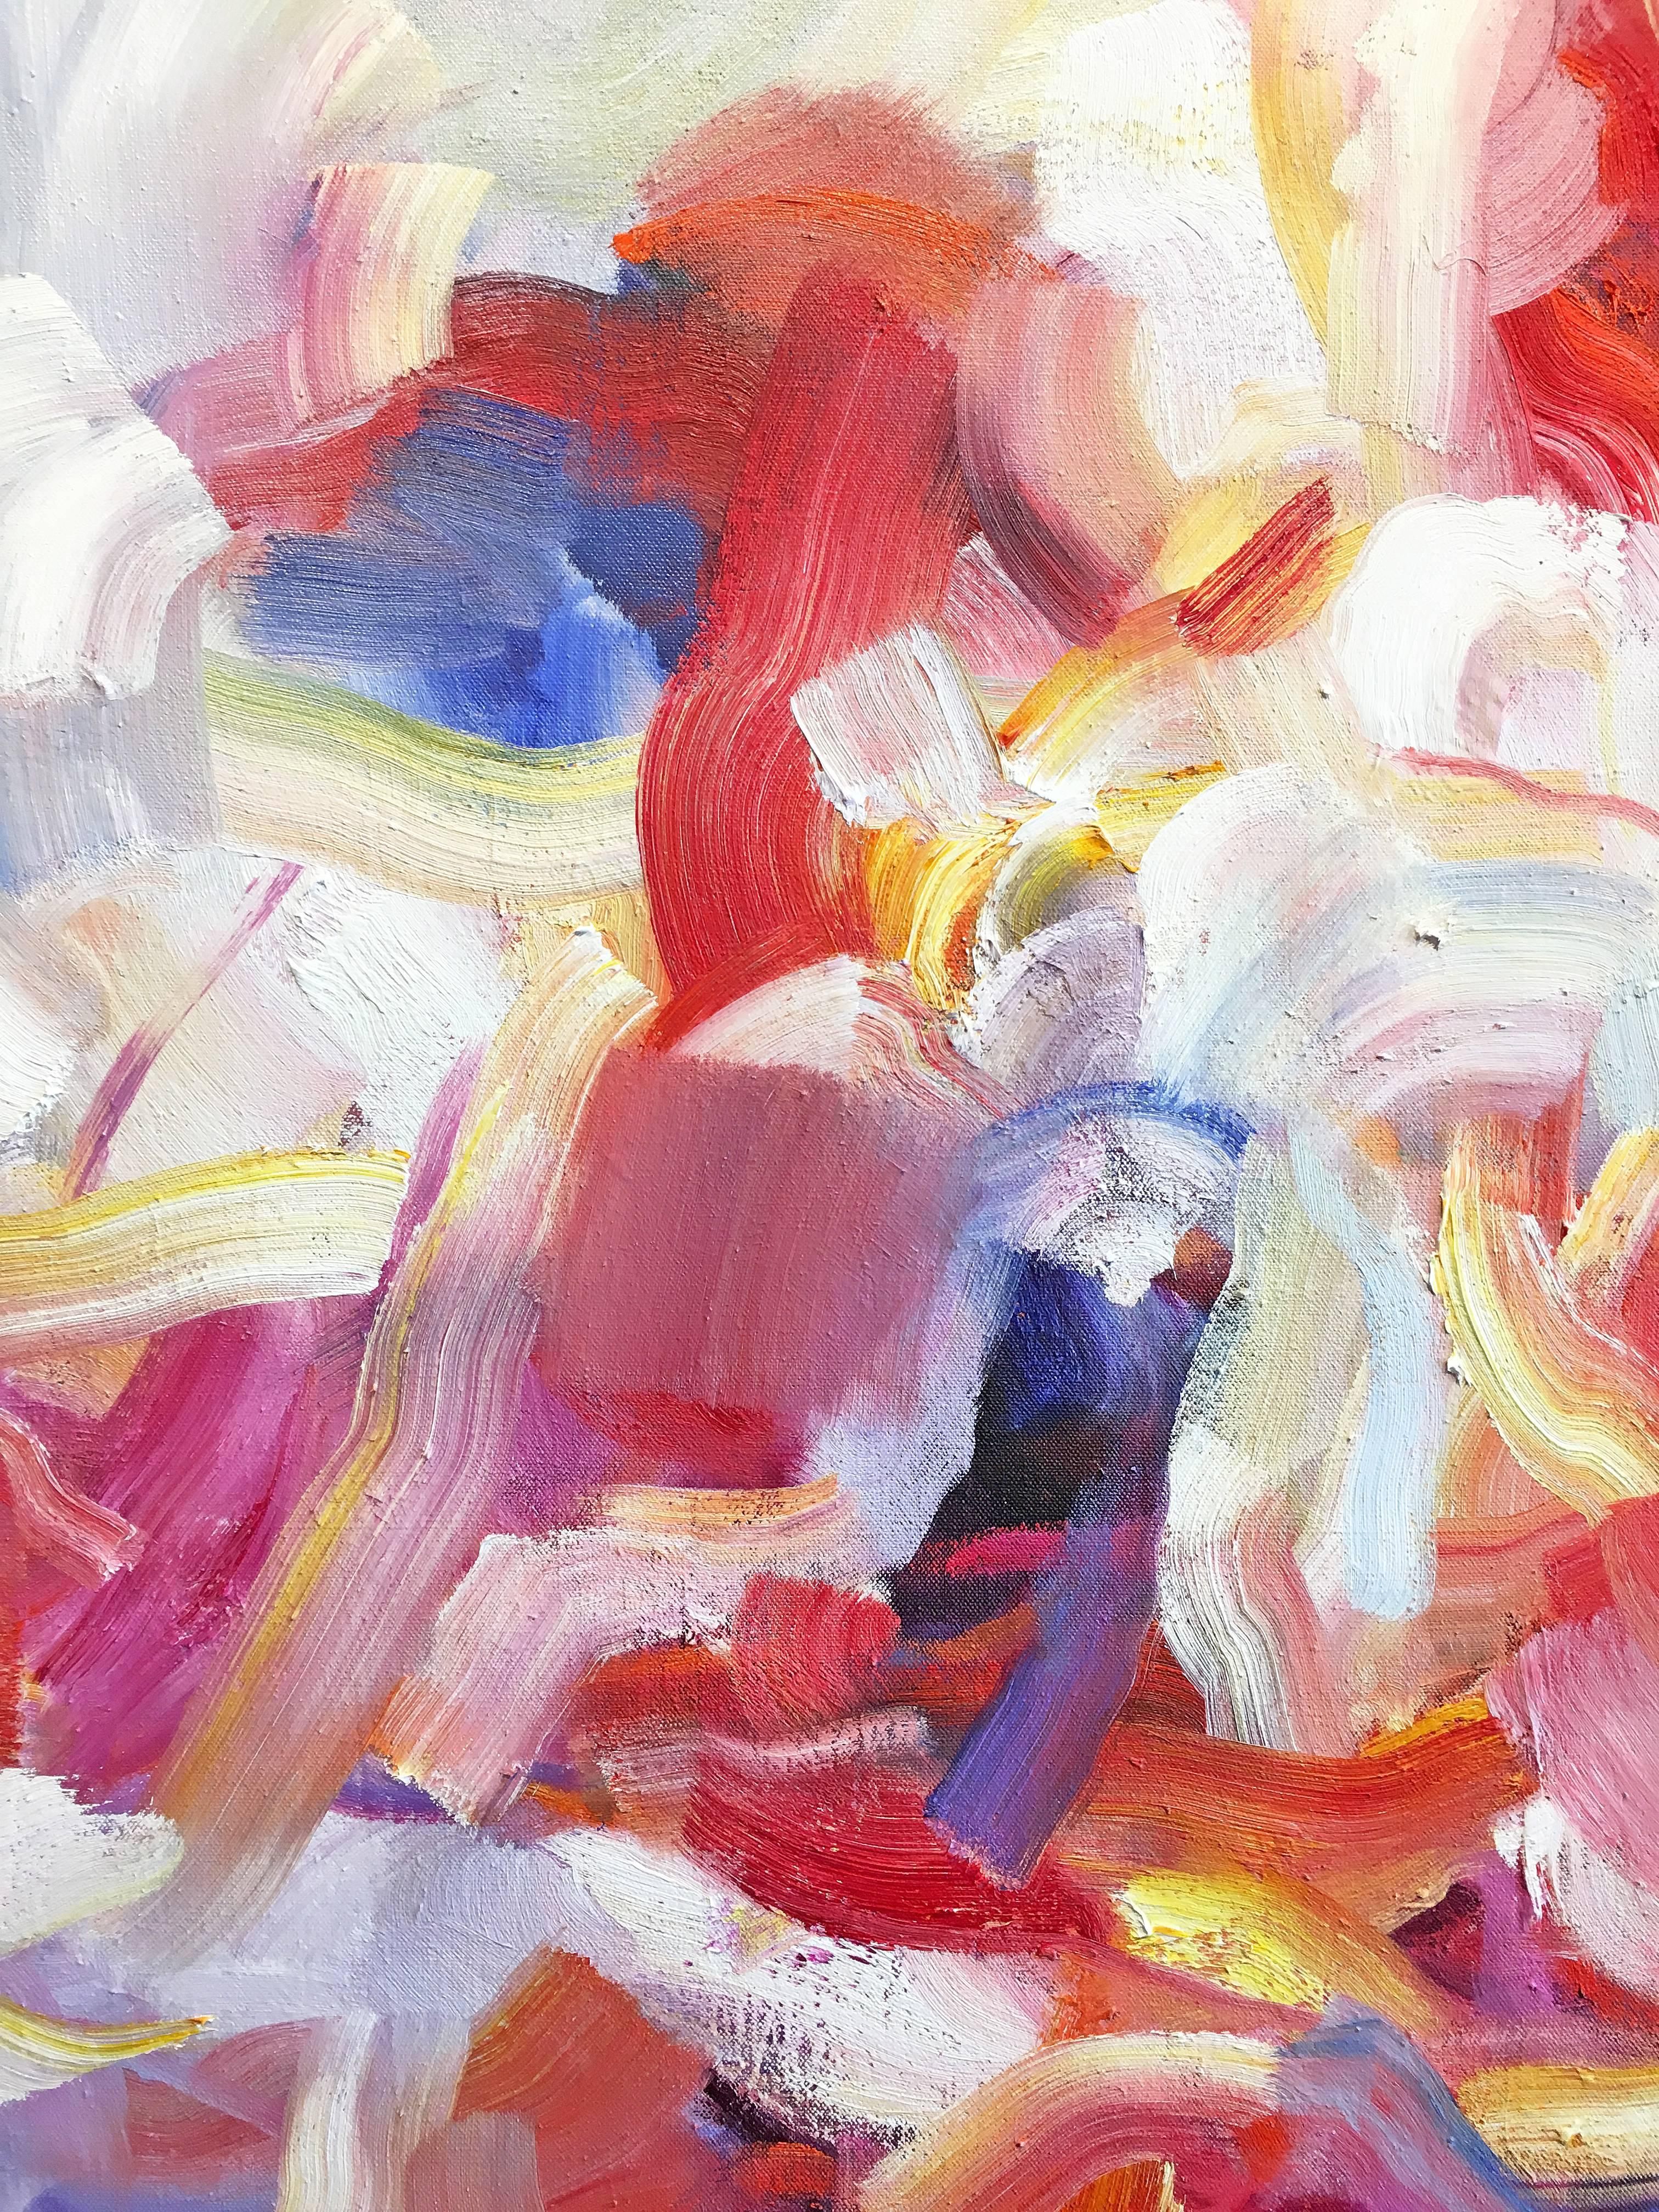 'Phoenix' 2018 by Chinese/Canadian artist Yangyang Pan. Oil on linen, 42 x 72 in. This beautiful abstract-impressionistic garden landscape painting incorporates large gestural brush strokes in rich colors of blue, purple, pink, red, orange, black,